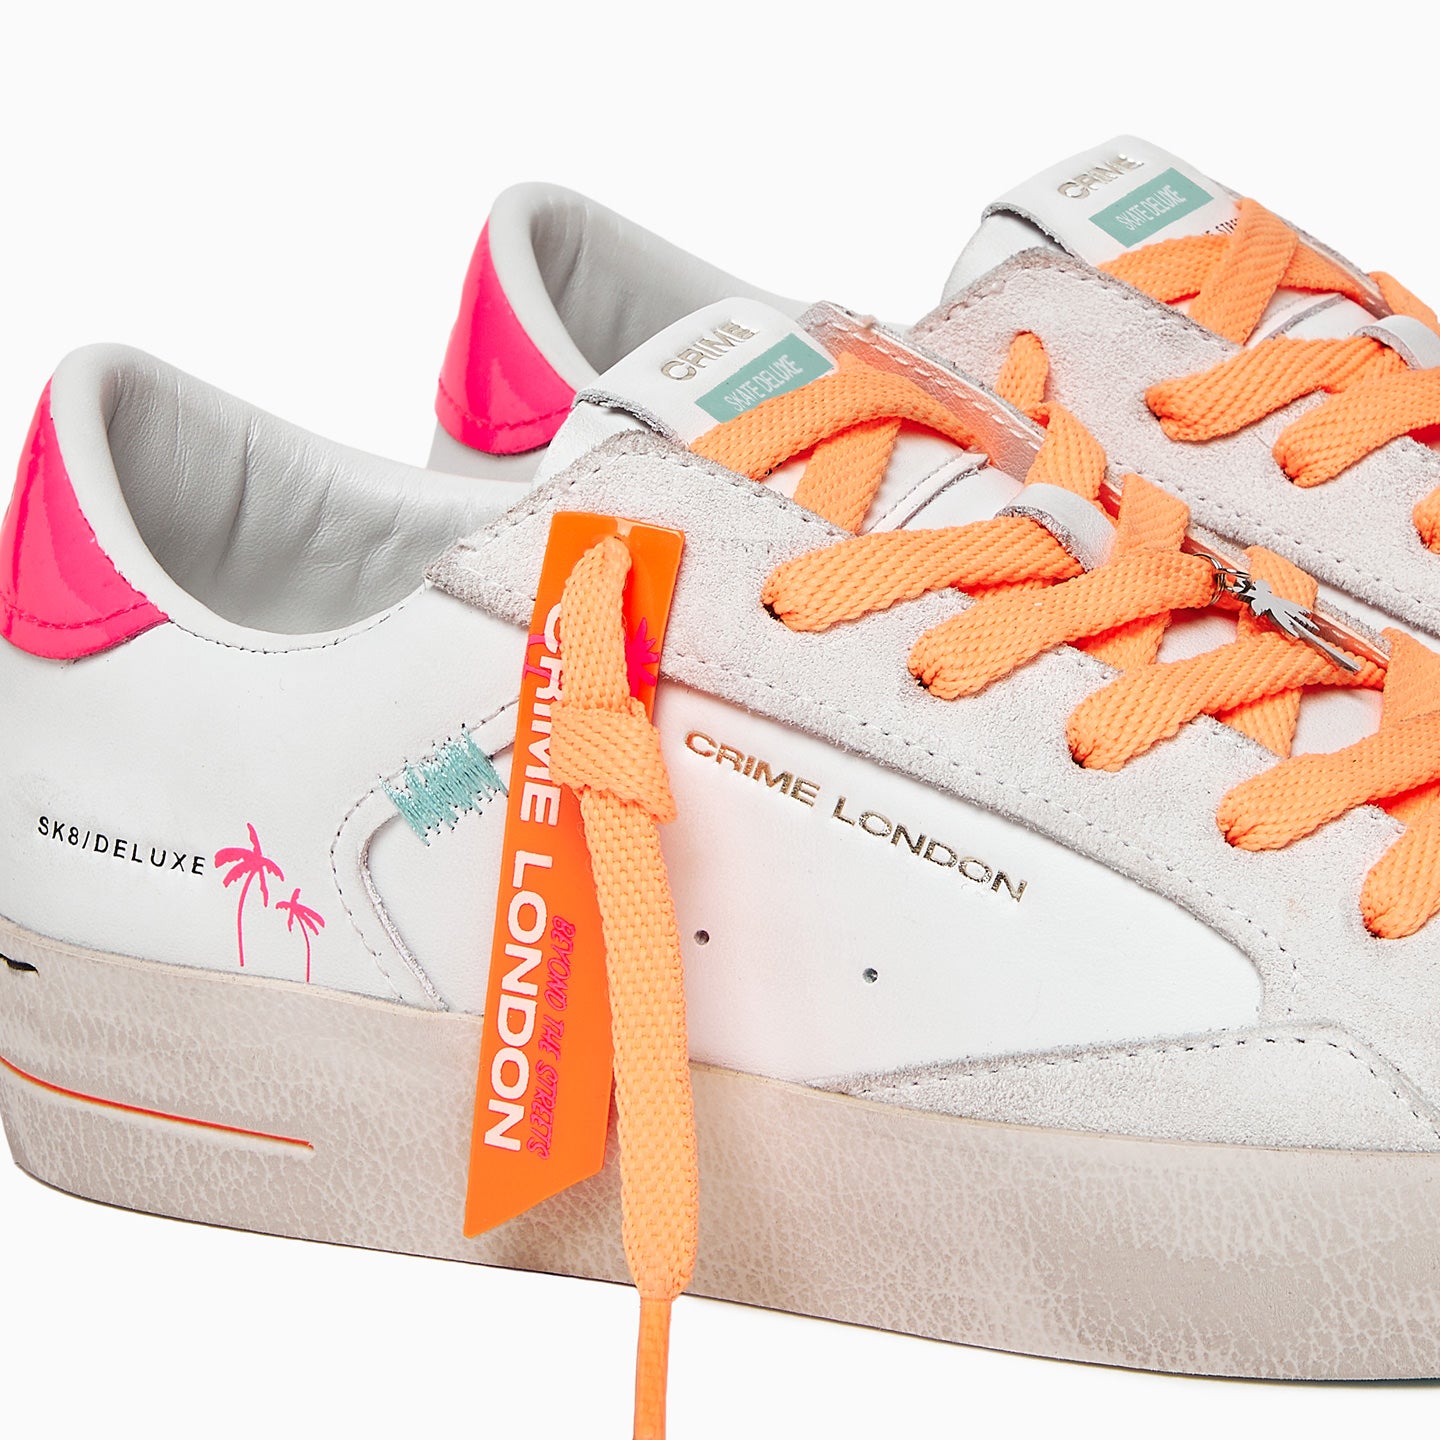 Sneakers Donna - SK8 FLUO ROSA - Crime London